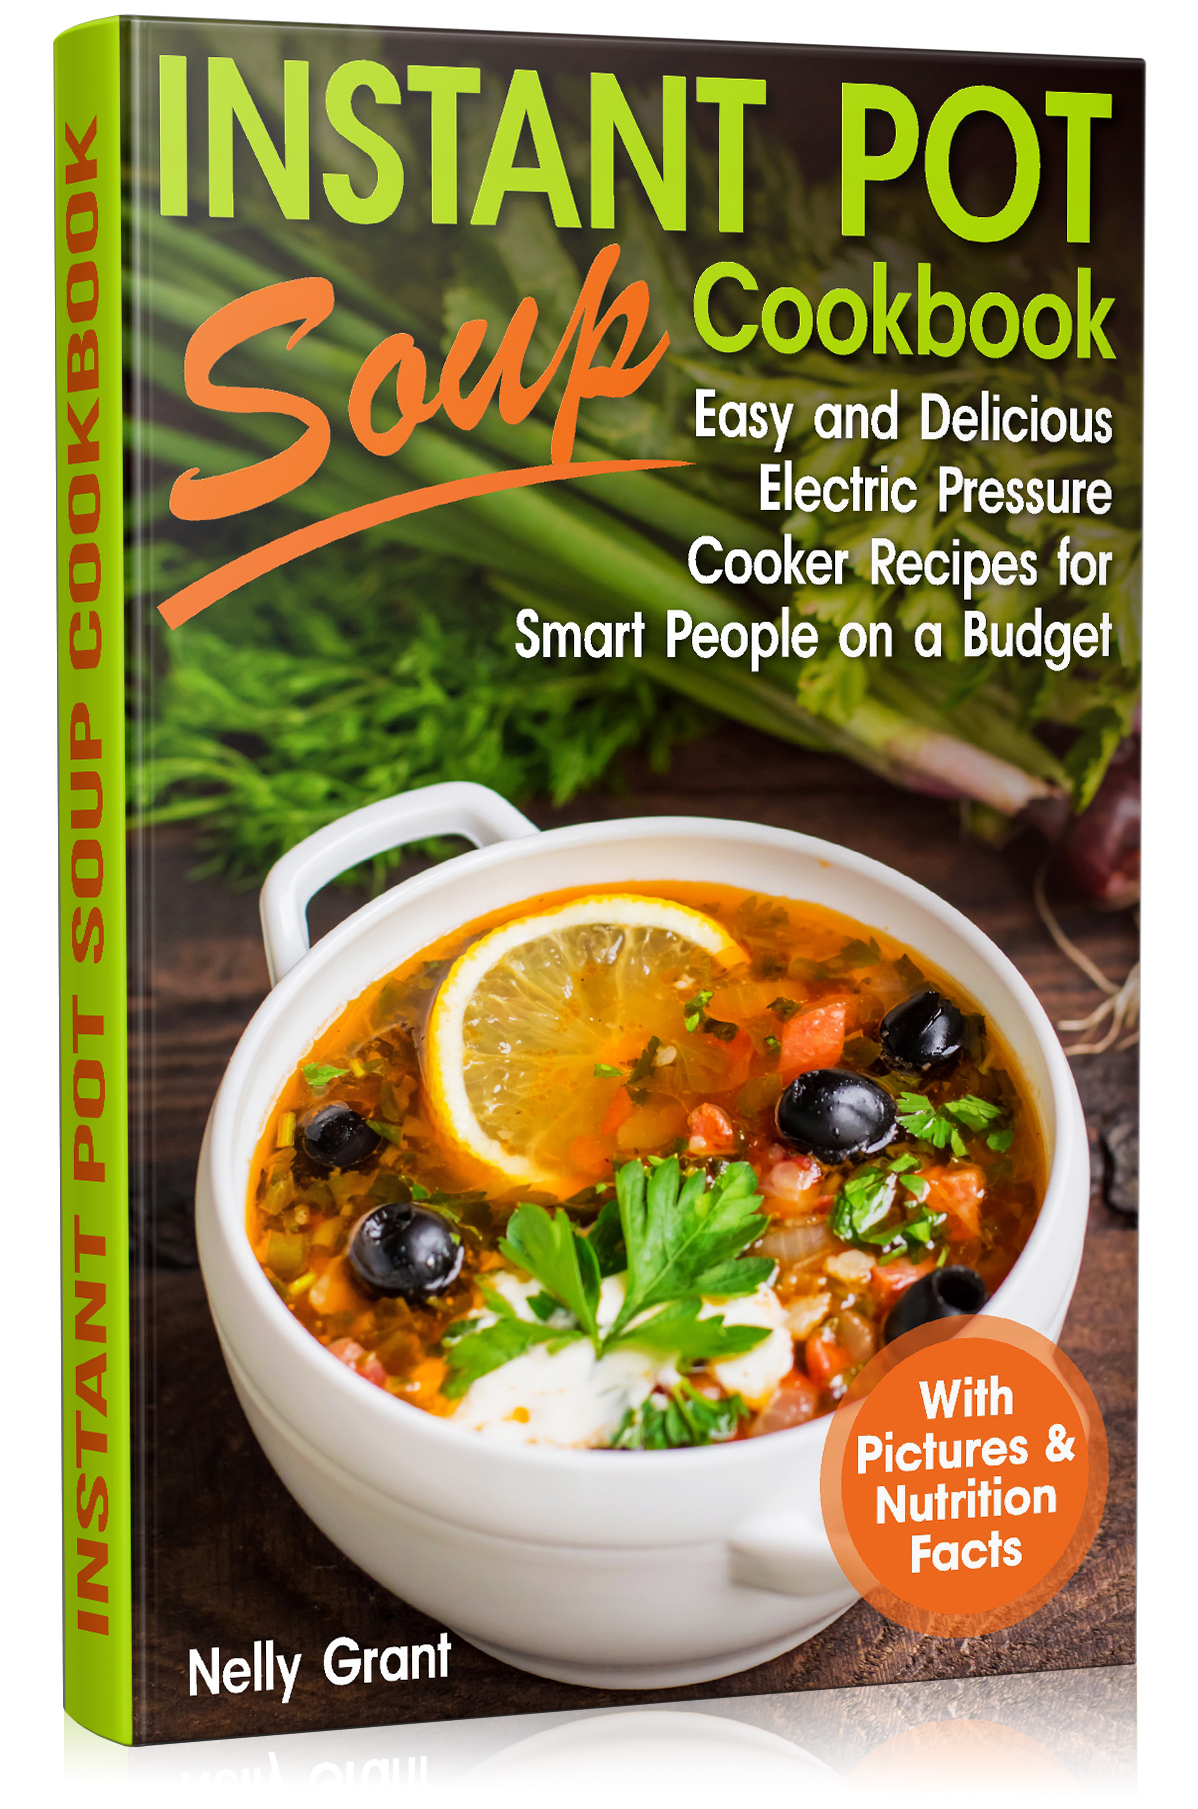 FREE: Instant Pot Soup Cookbook: Easy and Delicious Electric Pressure Cooker Recipes for Smart People on a Budget by Nelly Grant